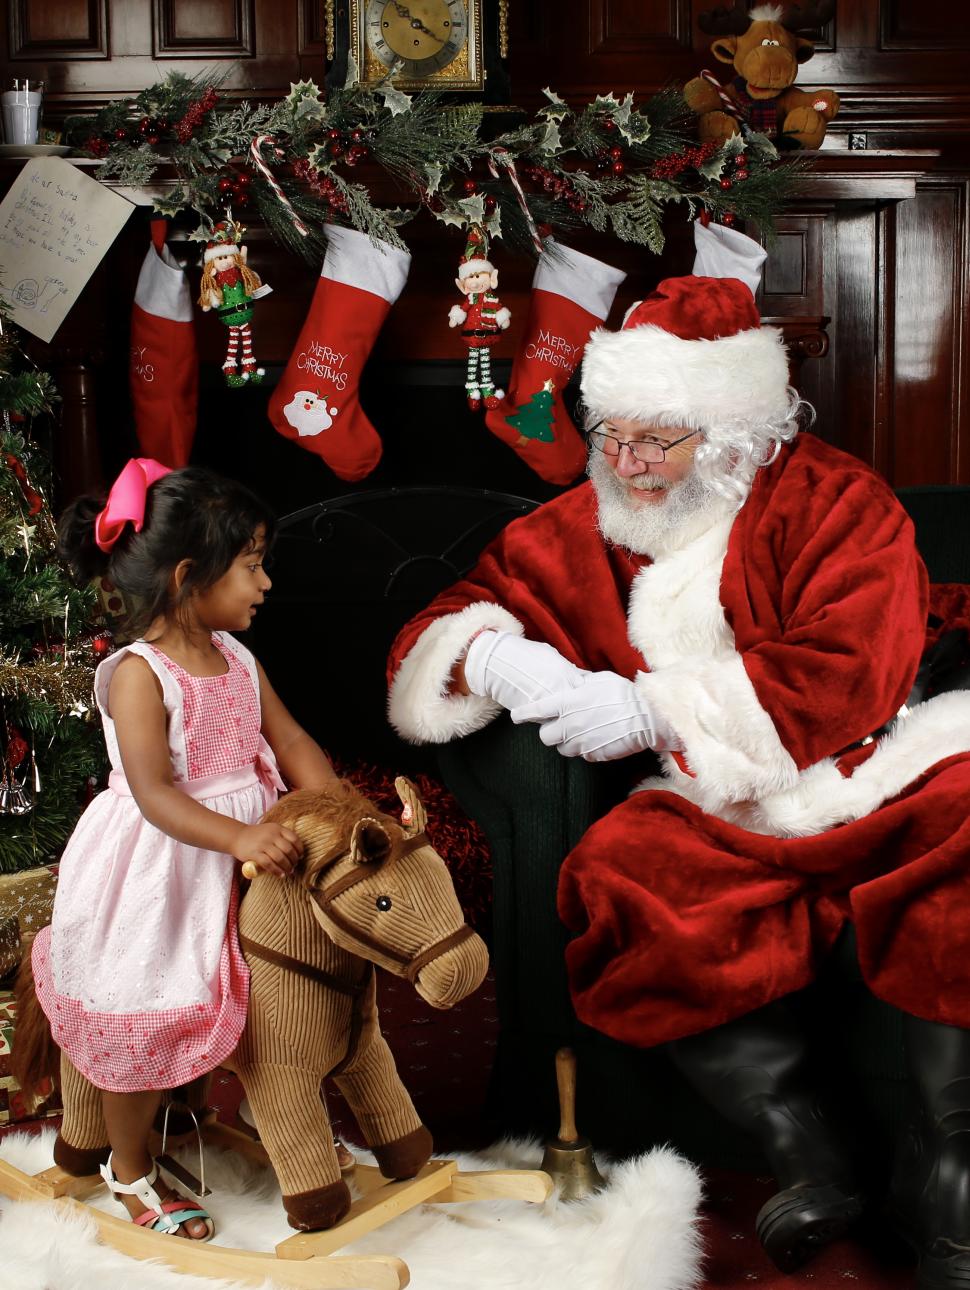 Image of a young girl rocking on a wooden horse looking at Santa Claus sitting on a chair with a christmas tree surrounded by presents and wooden wall in the background